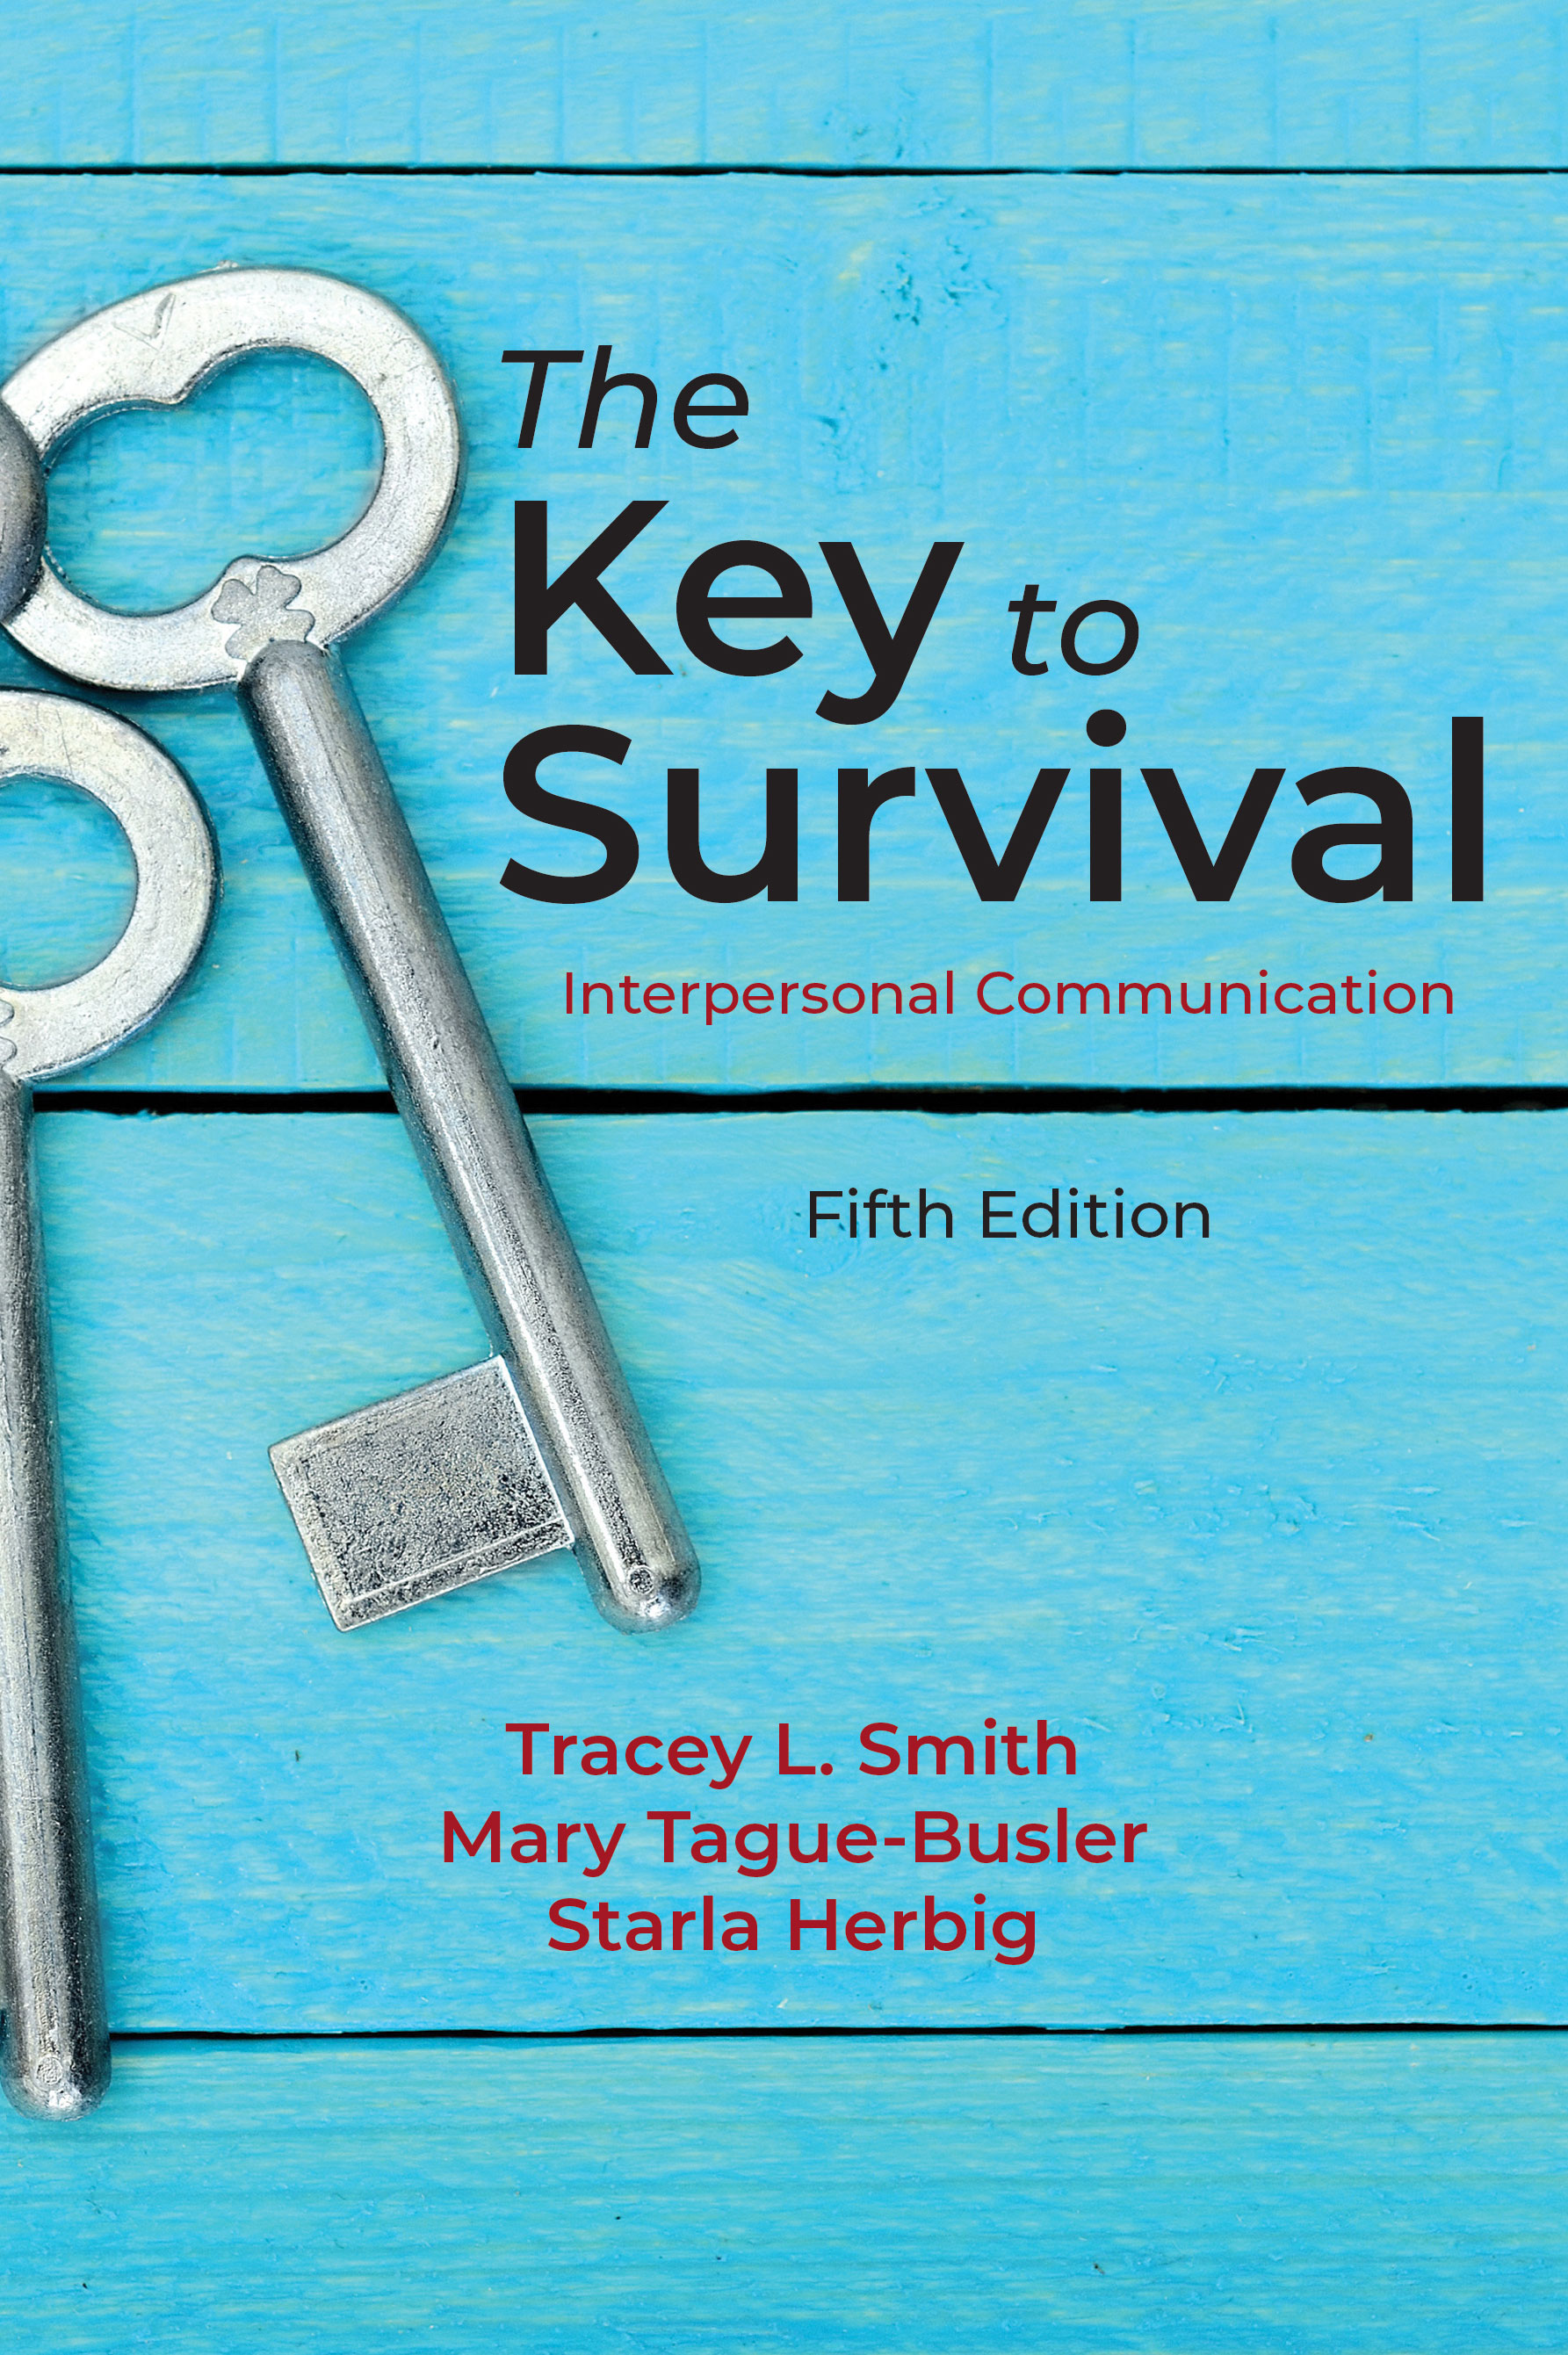 The Key to Survival: Interpersonal Communication, Fifth Edition by Tracey L. Smith, Mary  Tague-Busler, Starla  Herbig